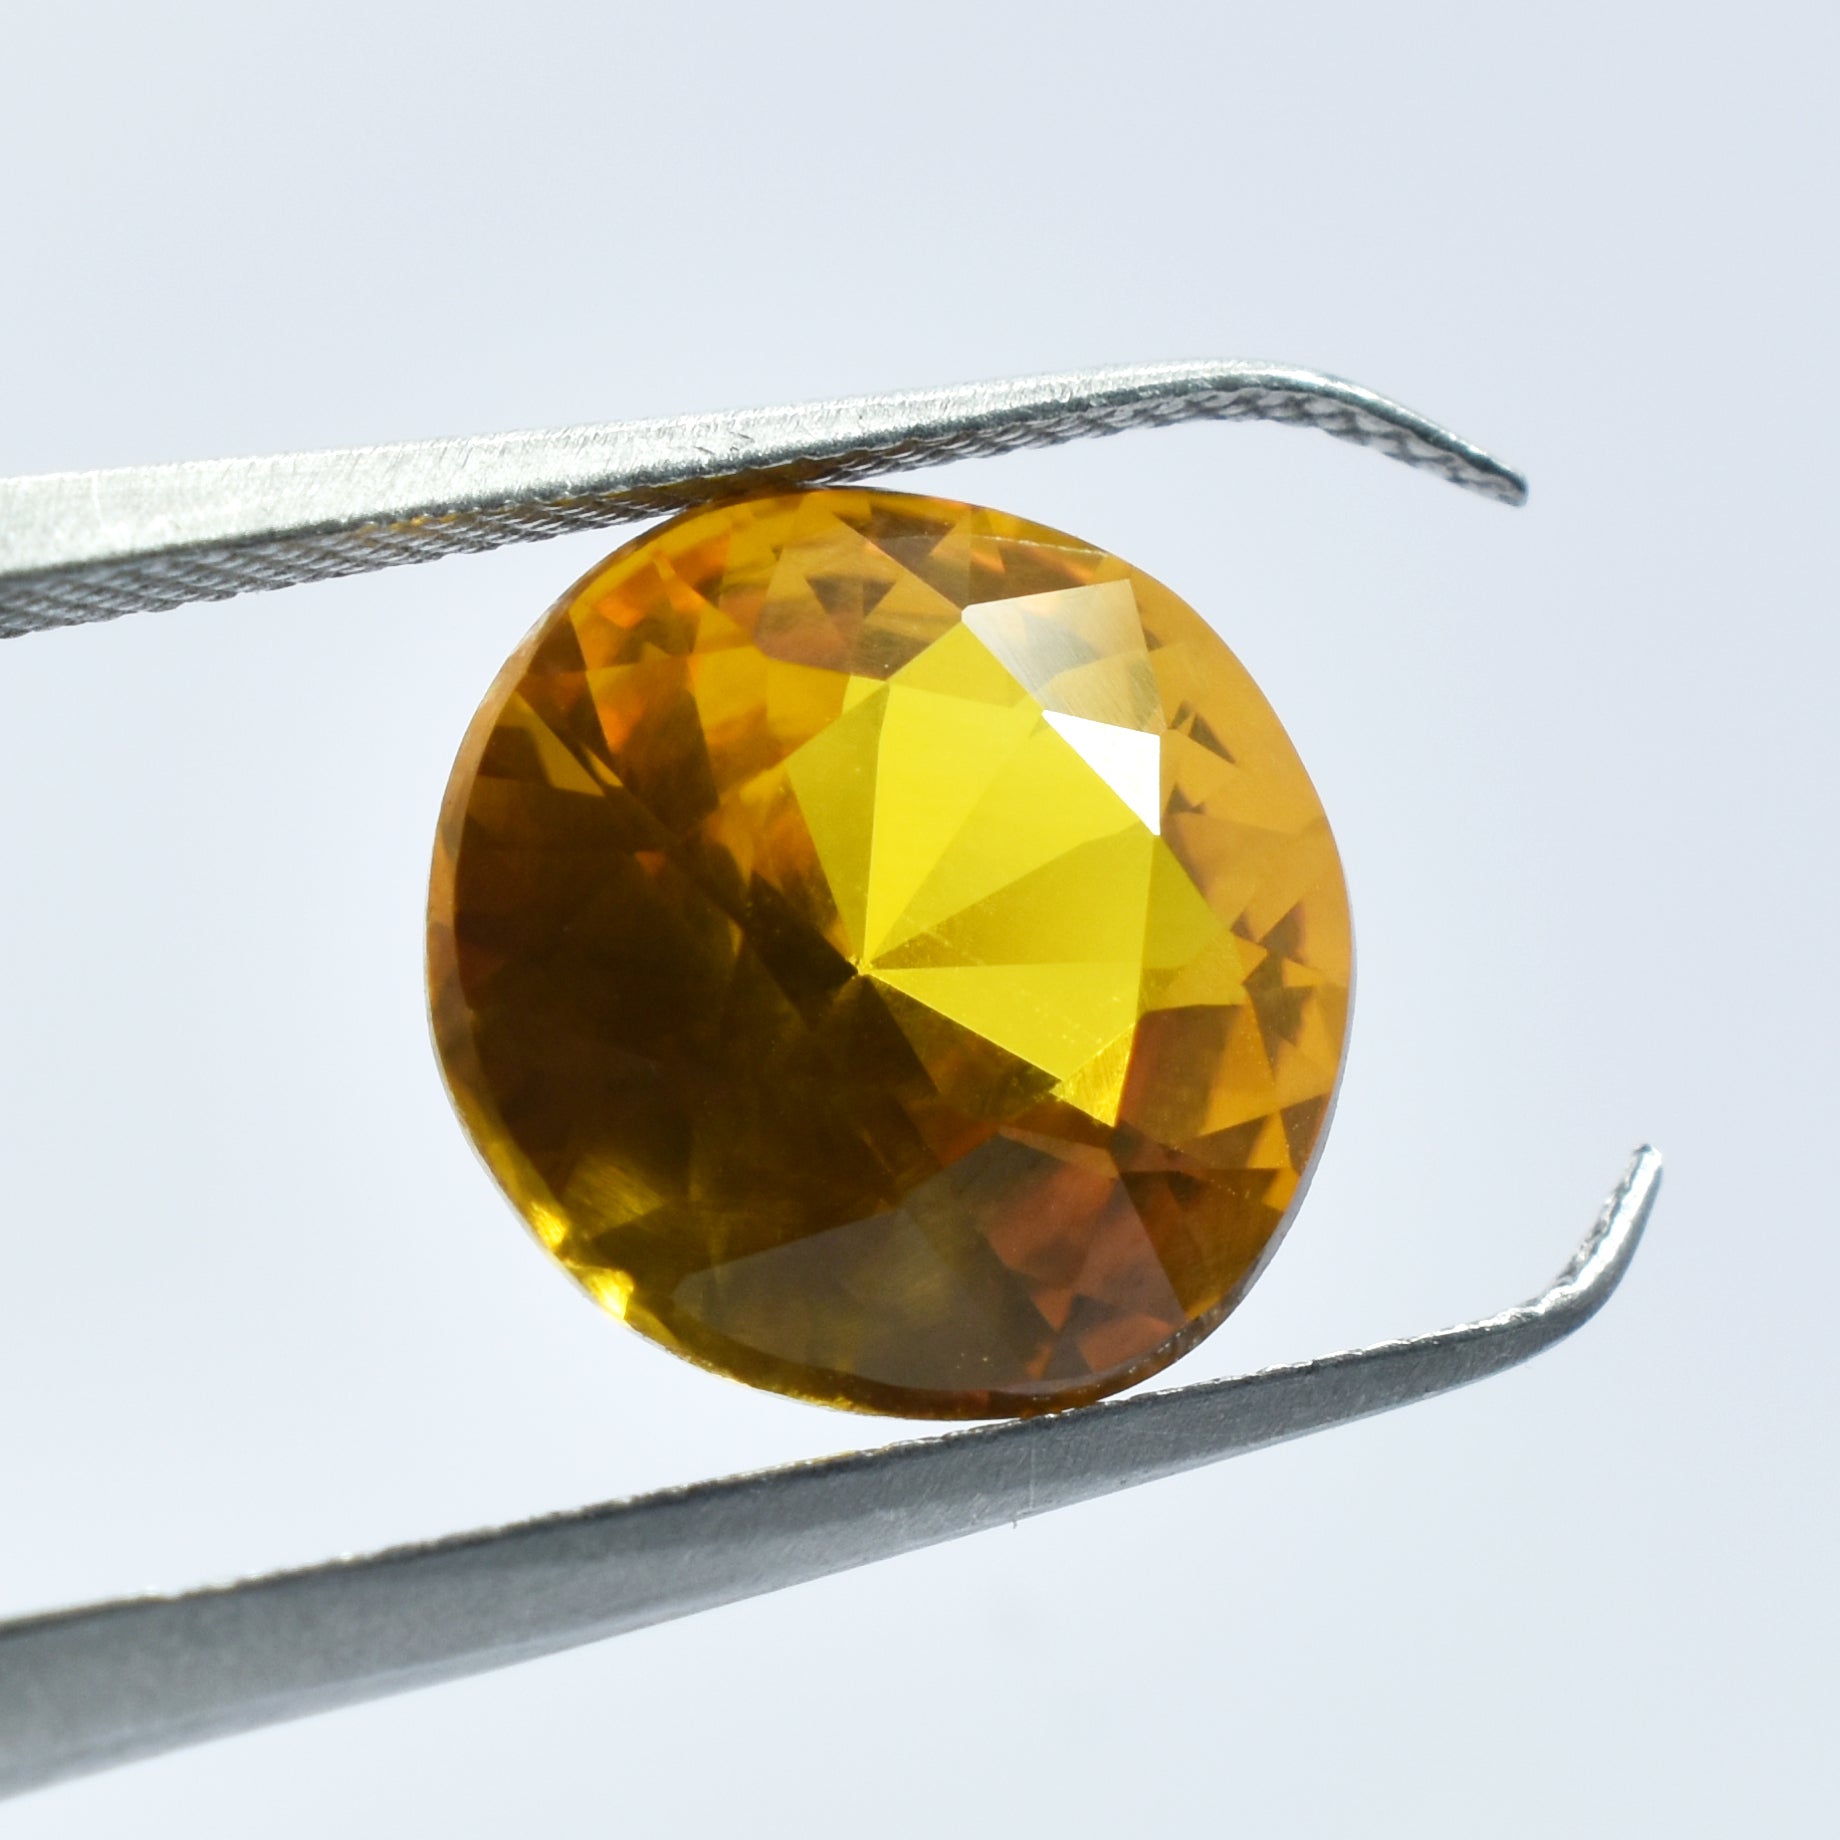 Sri-Lanka Sapphire Round Shape 6.05 Carat Natural Certified Yellow Sapphire Loose Gemstone Pretty Sapphire For Engagement Rings